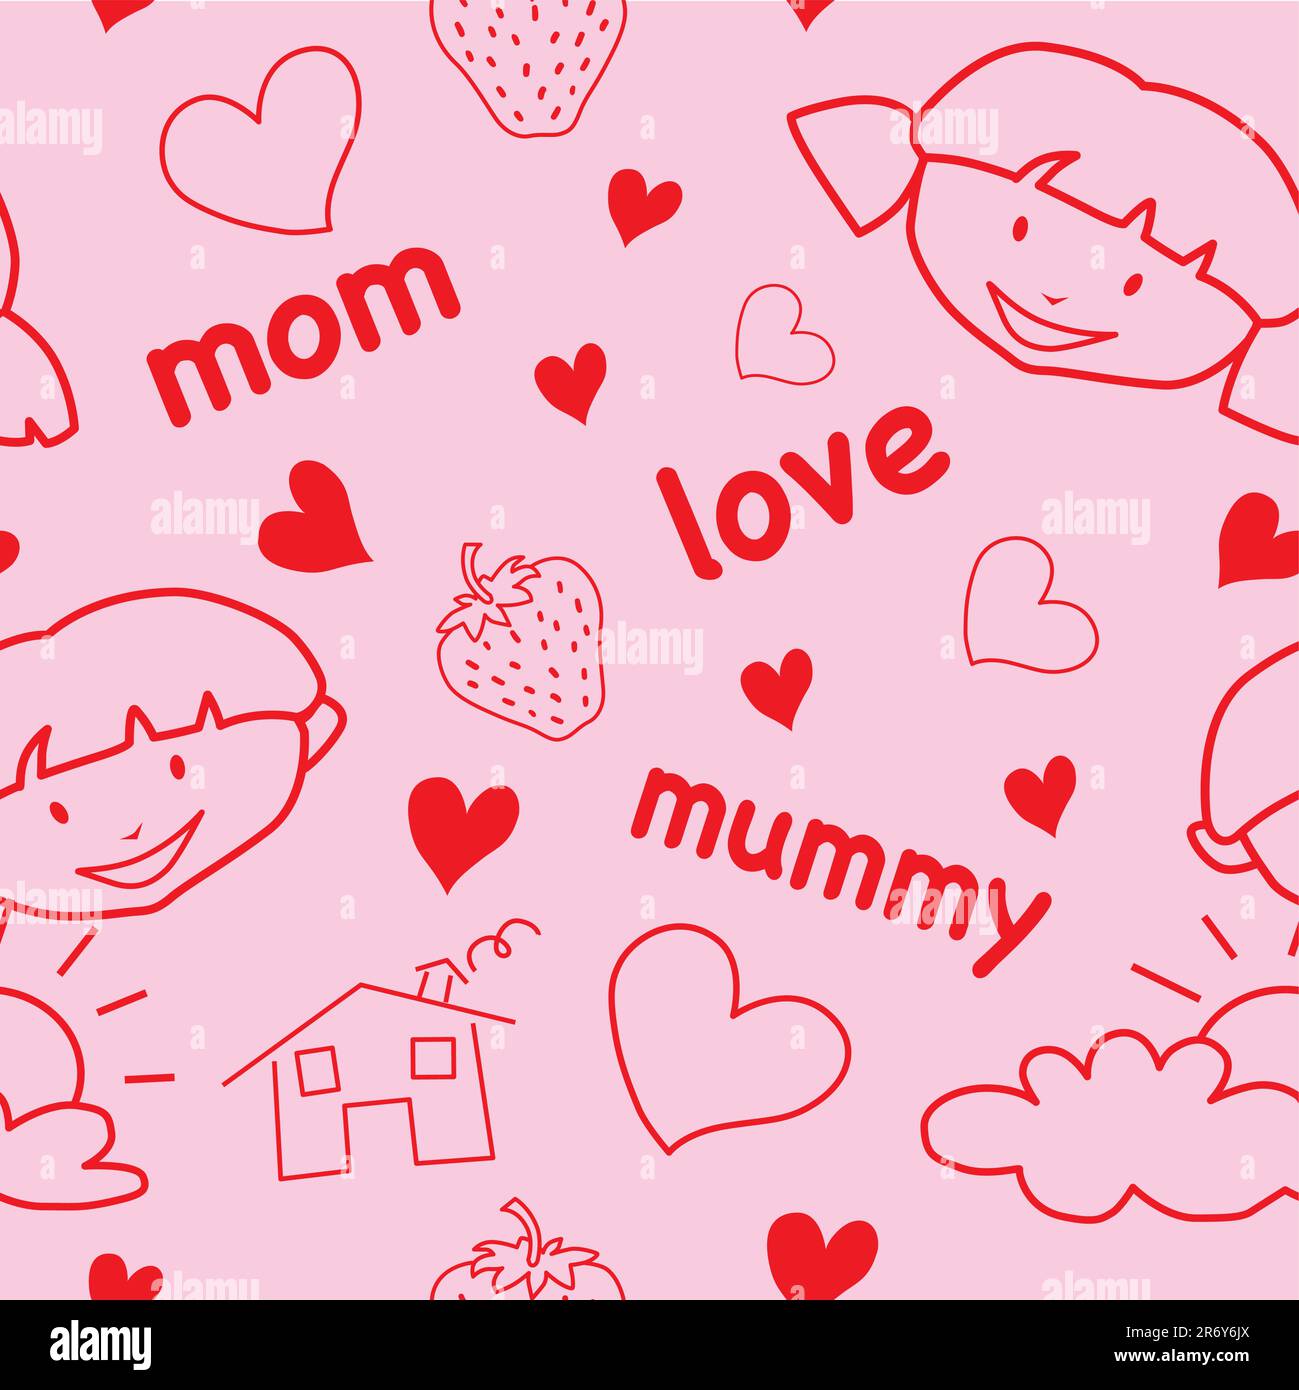 Mother & child Stock Vector Images - Alamy